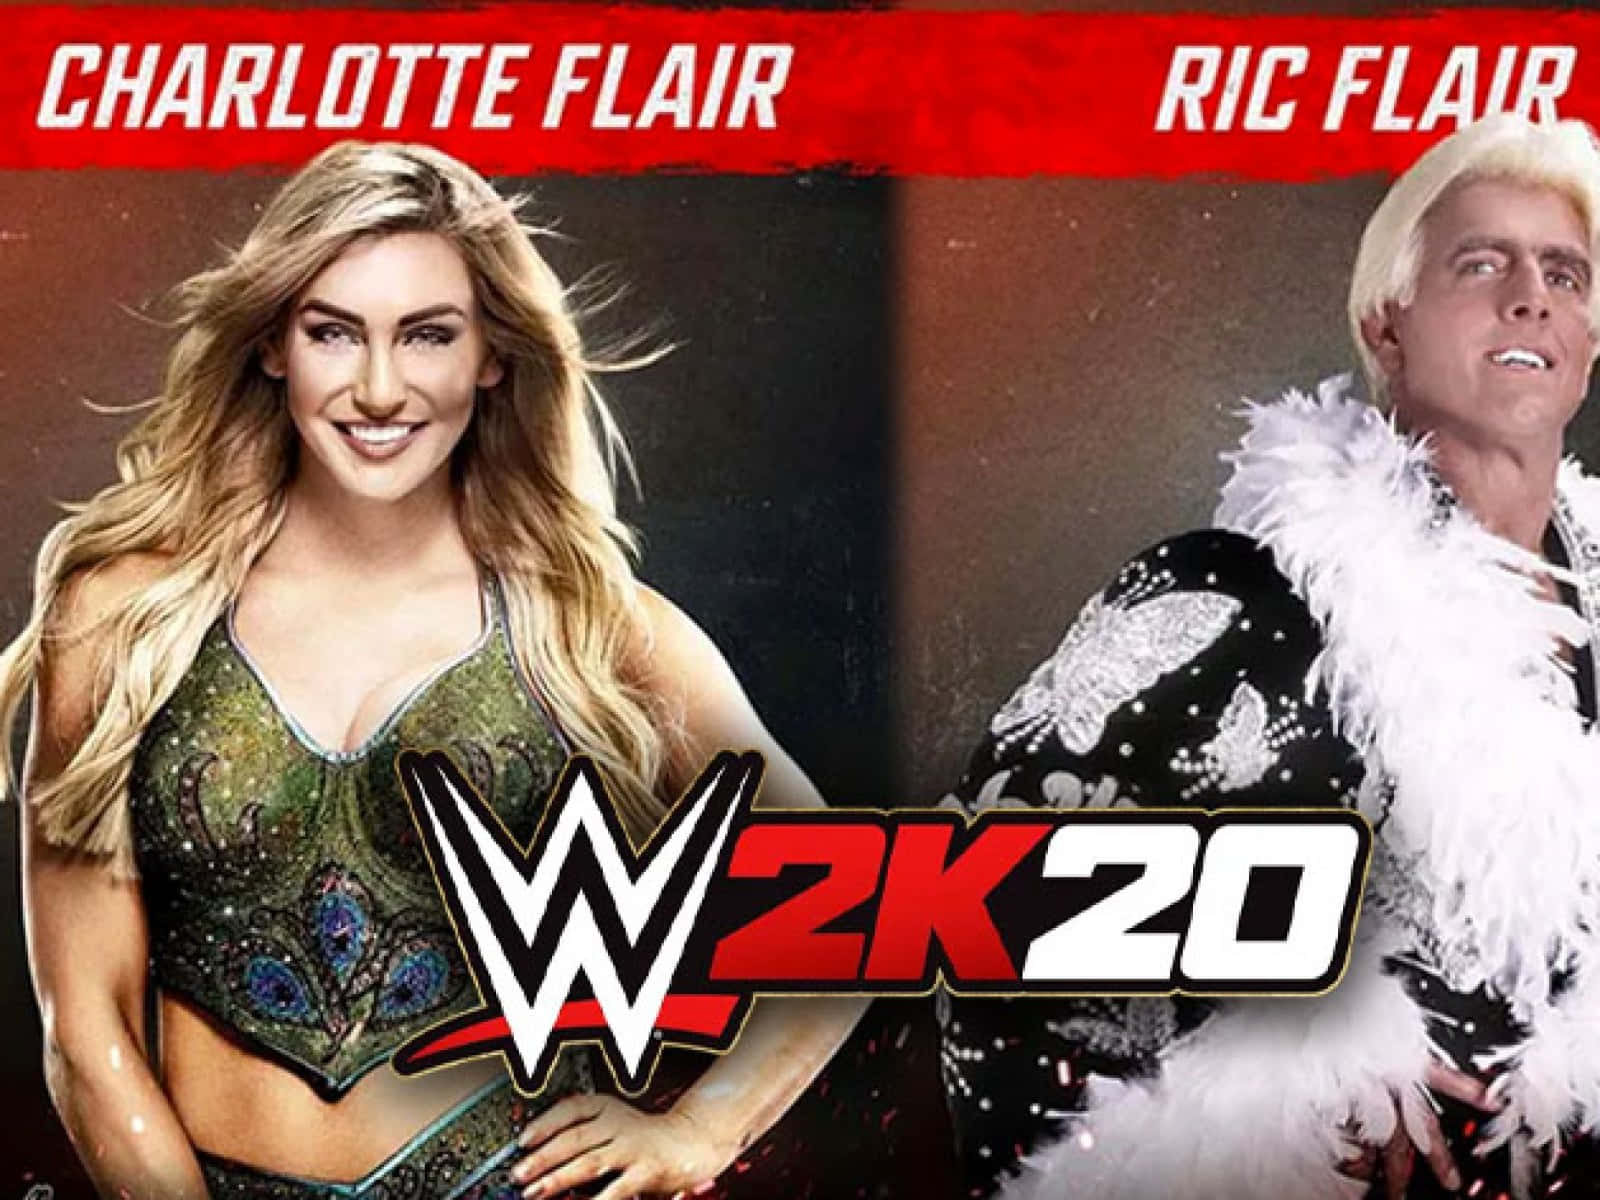 Charlotteflair Med Sin Pappa Ric Flair I Wwe 2020-truppen. Wallpaper